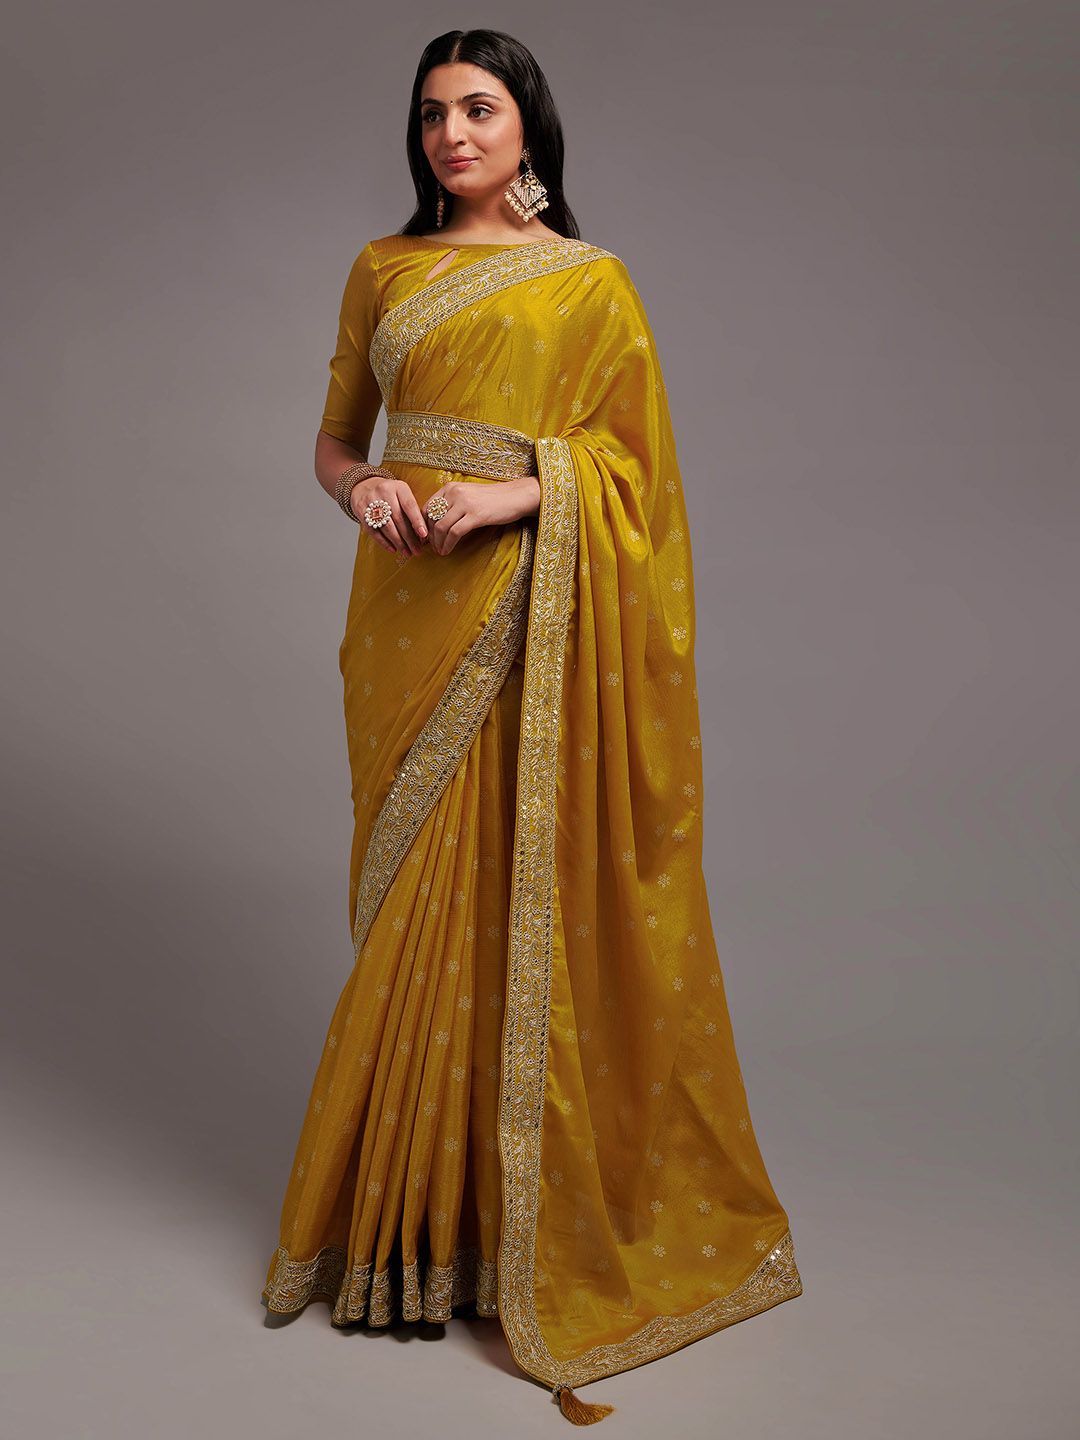 KALINI Floral Embroidered Saree Price in India